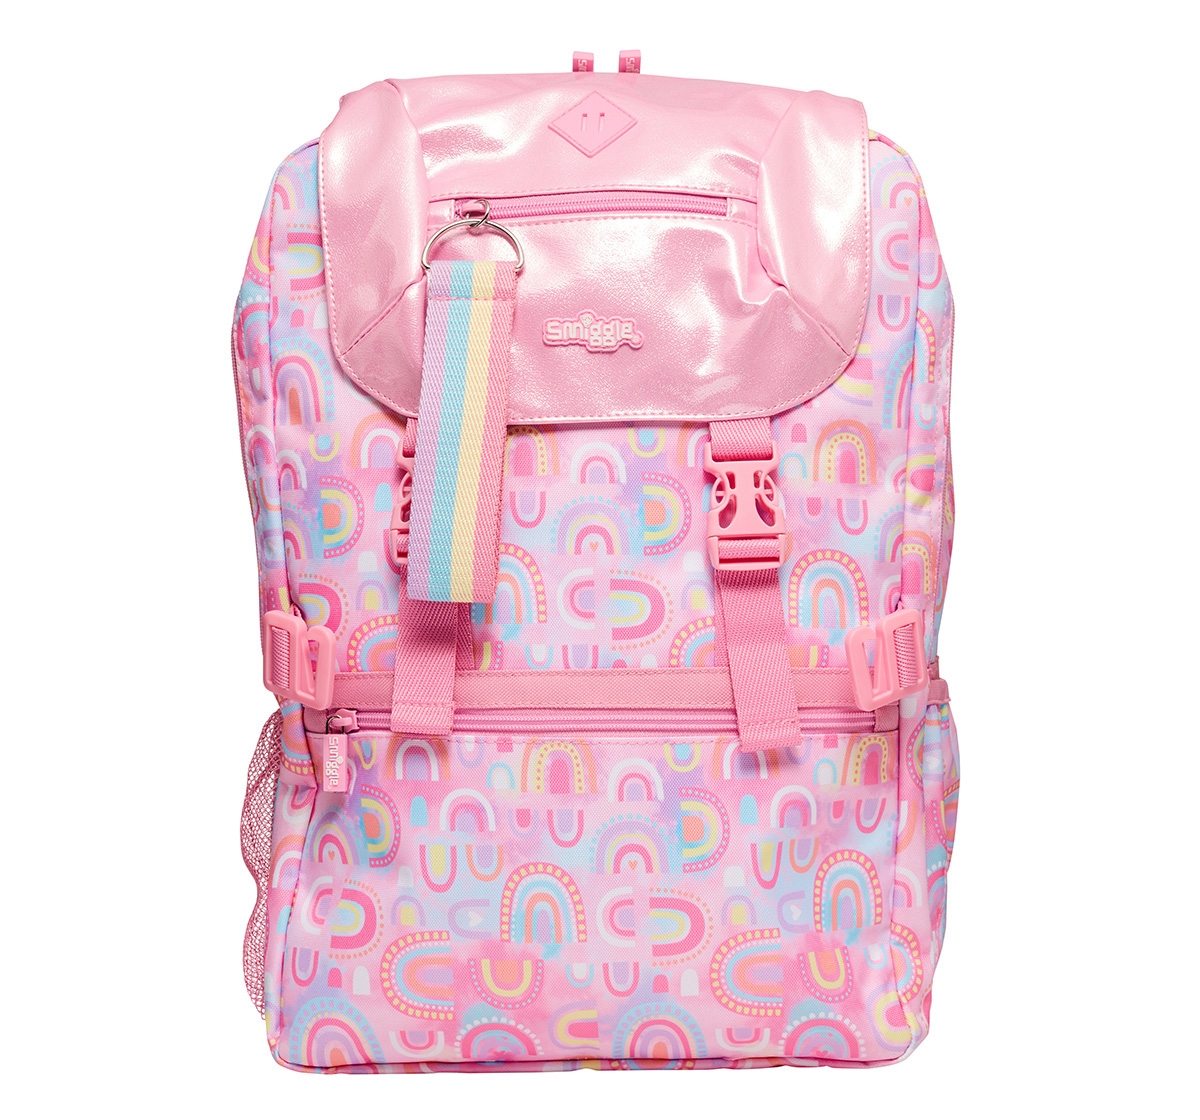 Smiggle Bright Side Foldover Attachable Colourful printed bag for 